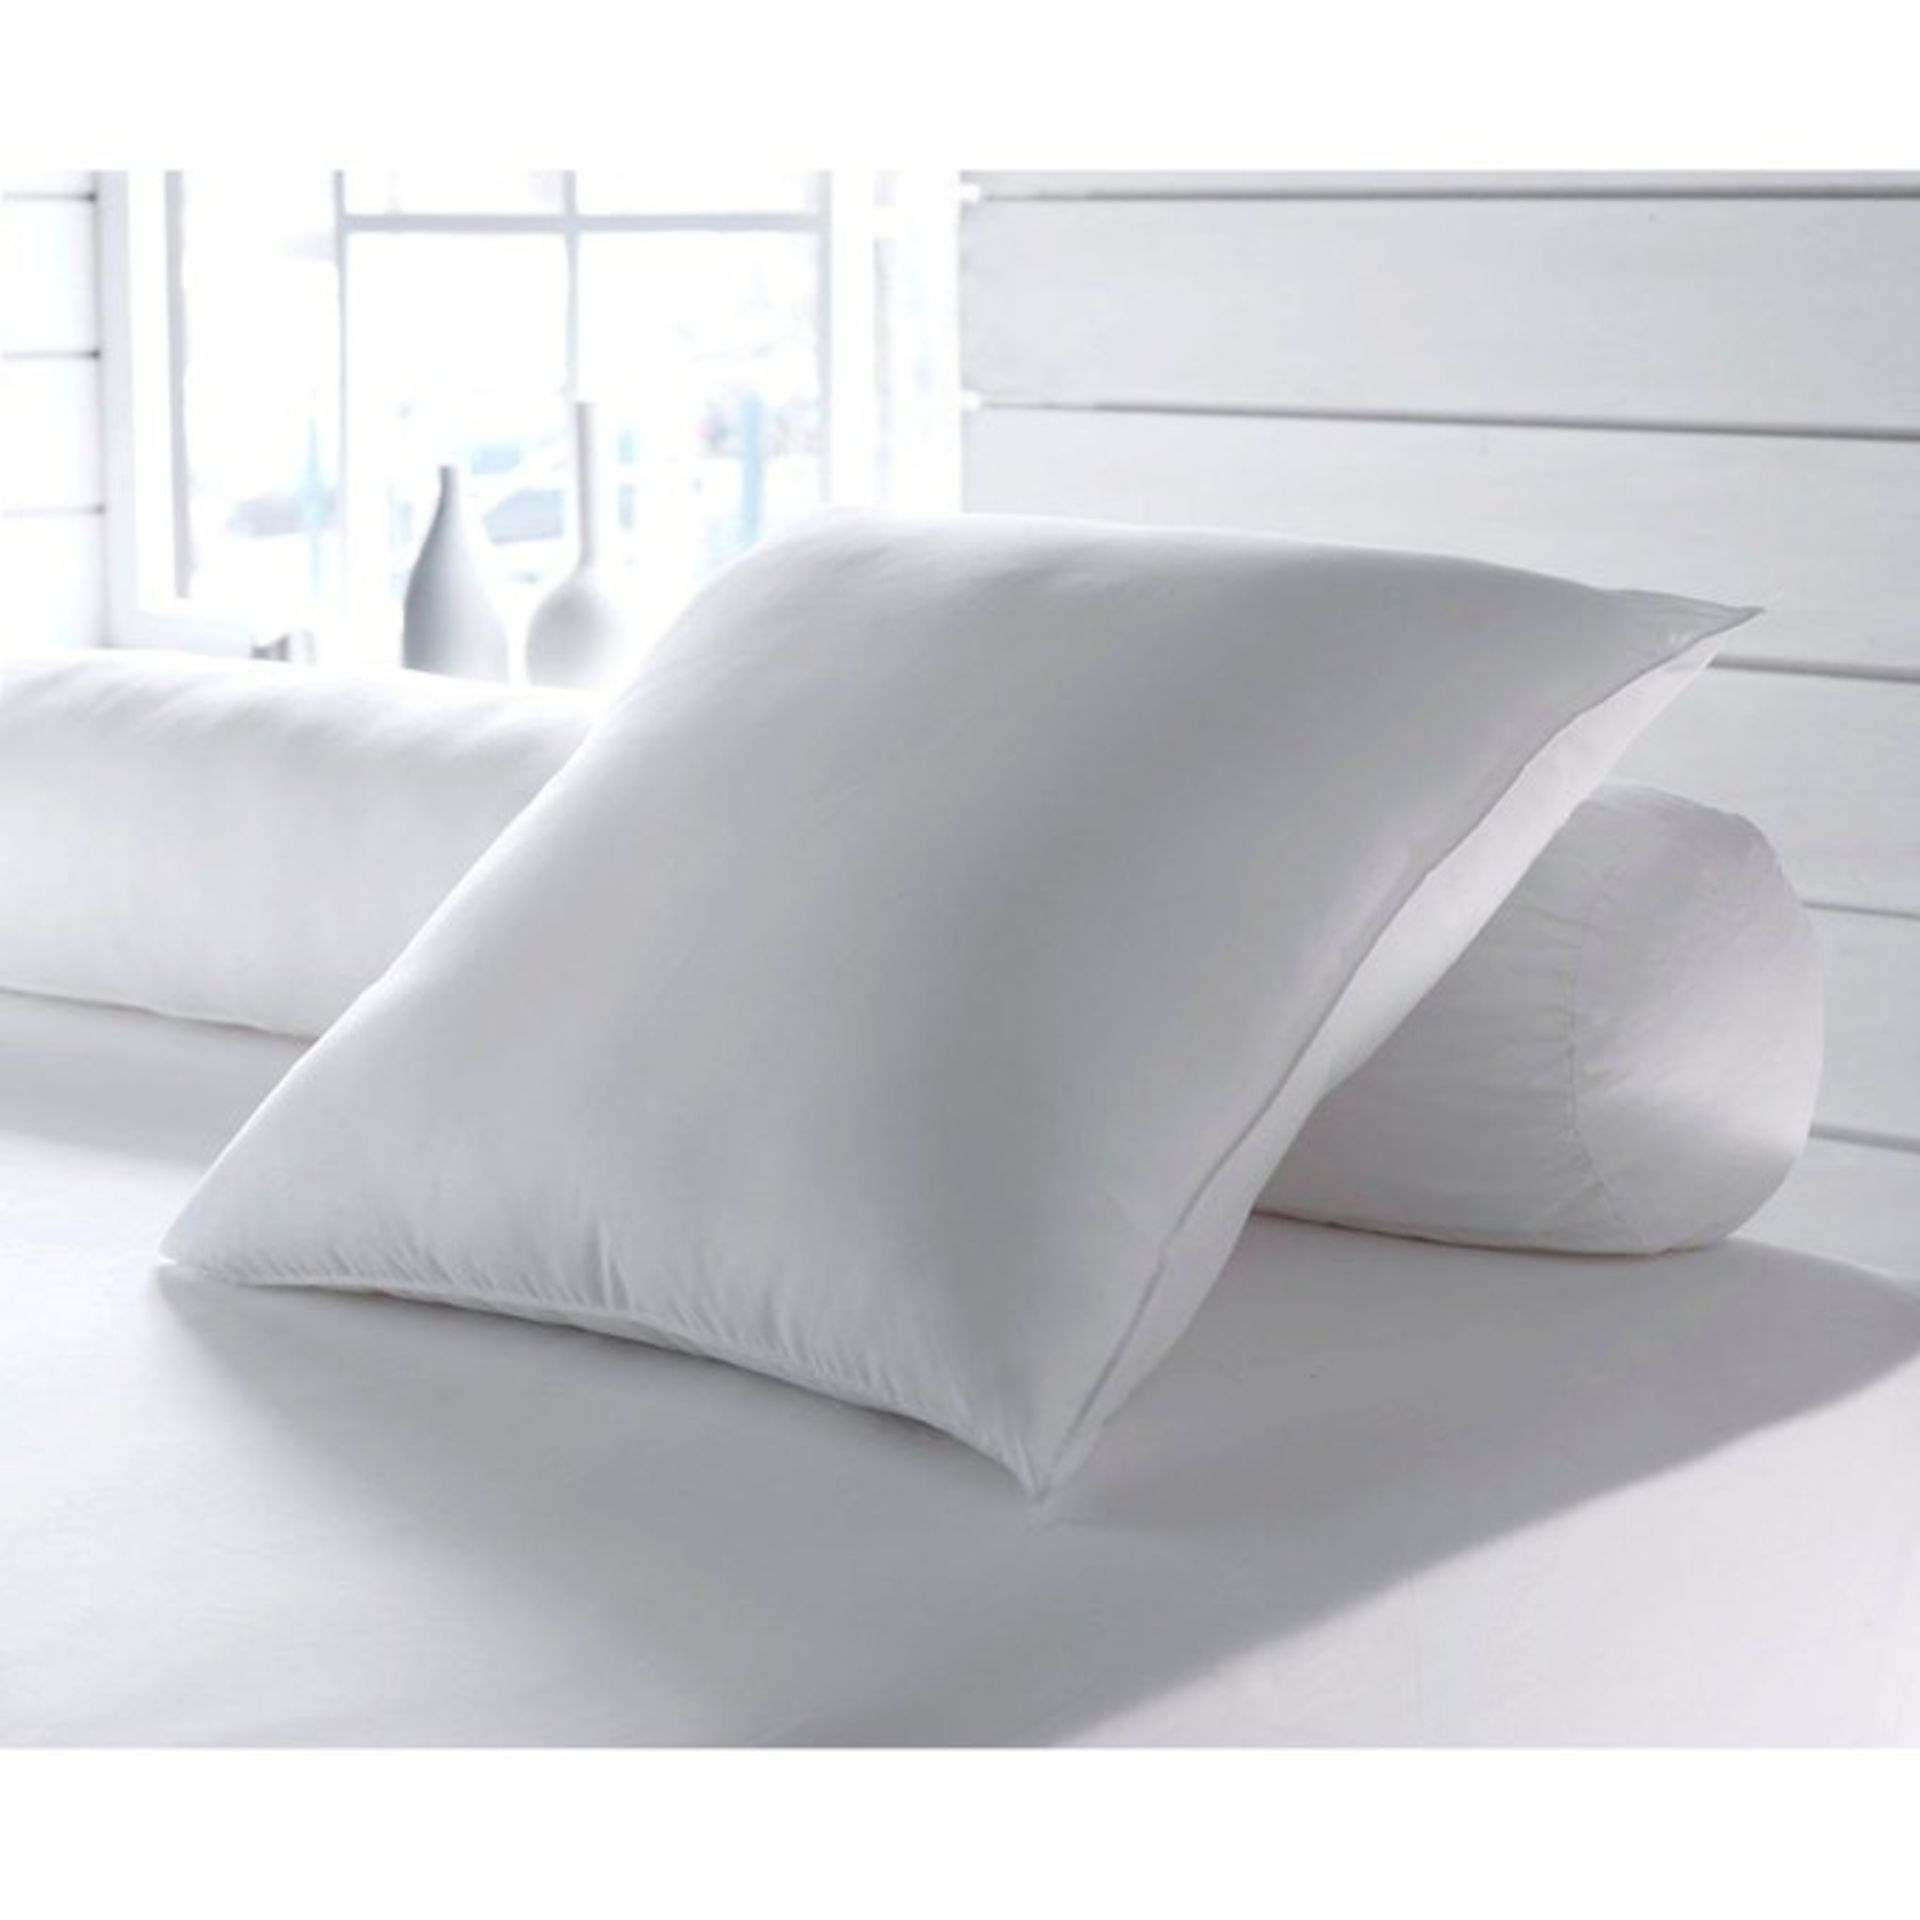 1 GRADE A BAGGED DESIGNER DODO SYNTHETIC SOFT SQUARE PILLOW IN WHITE / SIZE: 65 X 65CM / RRP £30.